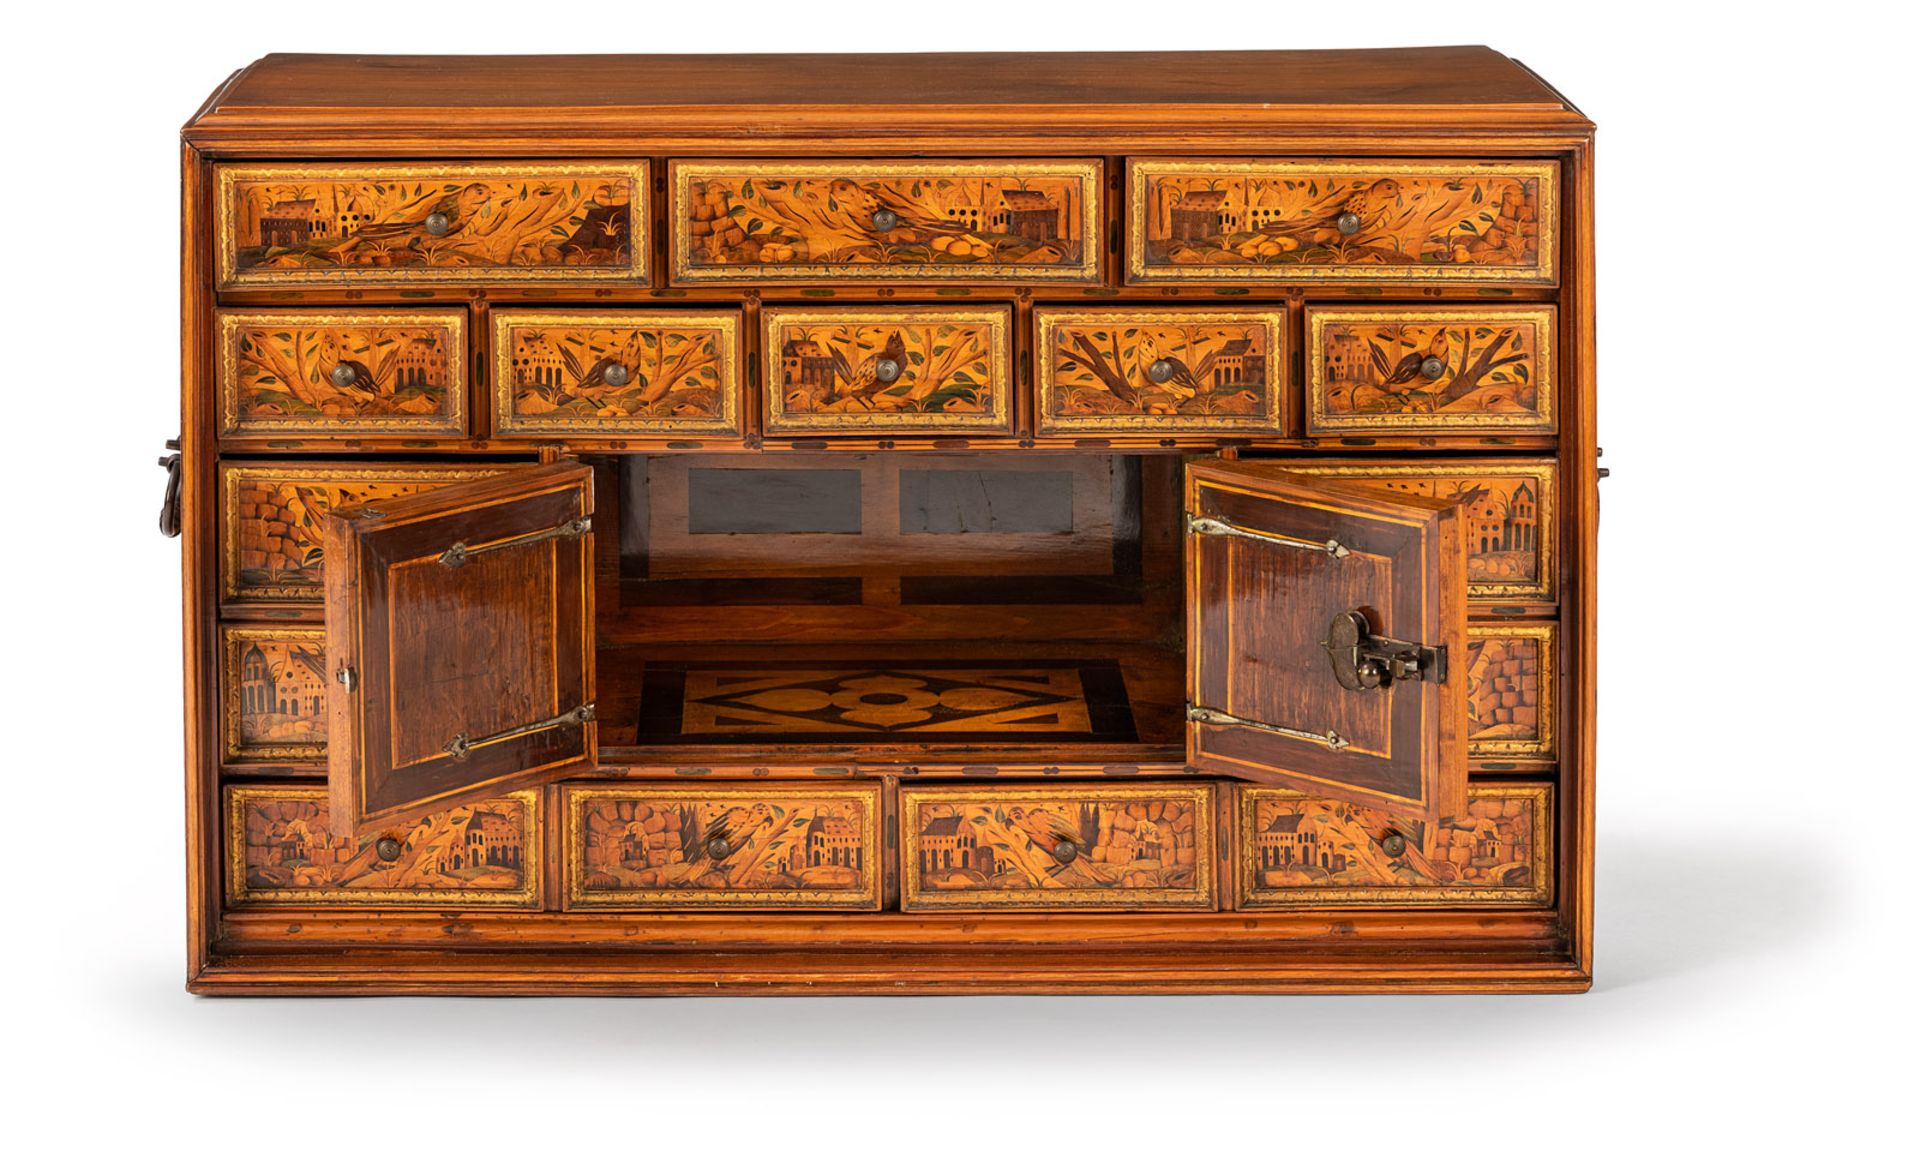 A FINE SOUTH GERMAN PARCEL GILT FRUITWOOD, ASH, SYCAMORE AND MARQUETRY CABINET - Image 2 of 12